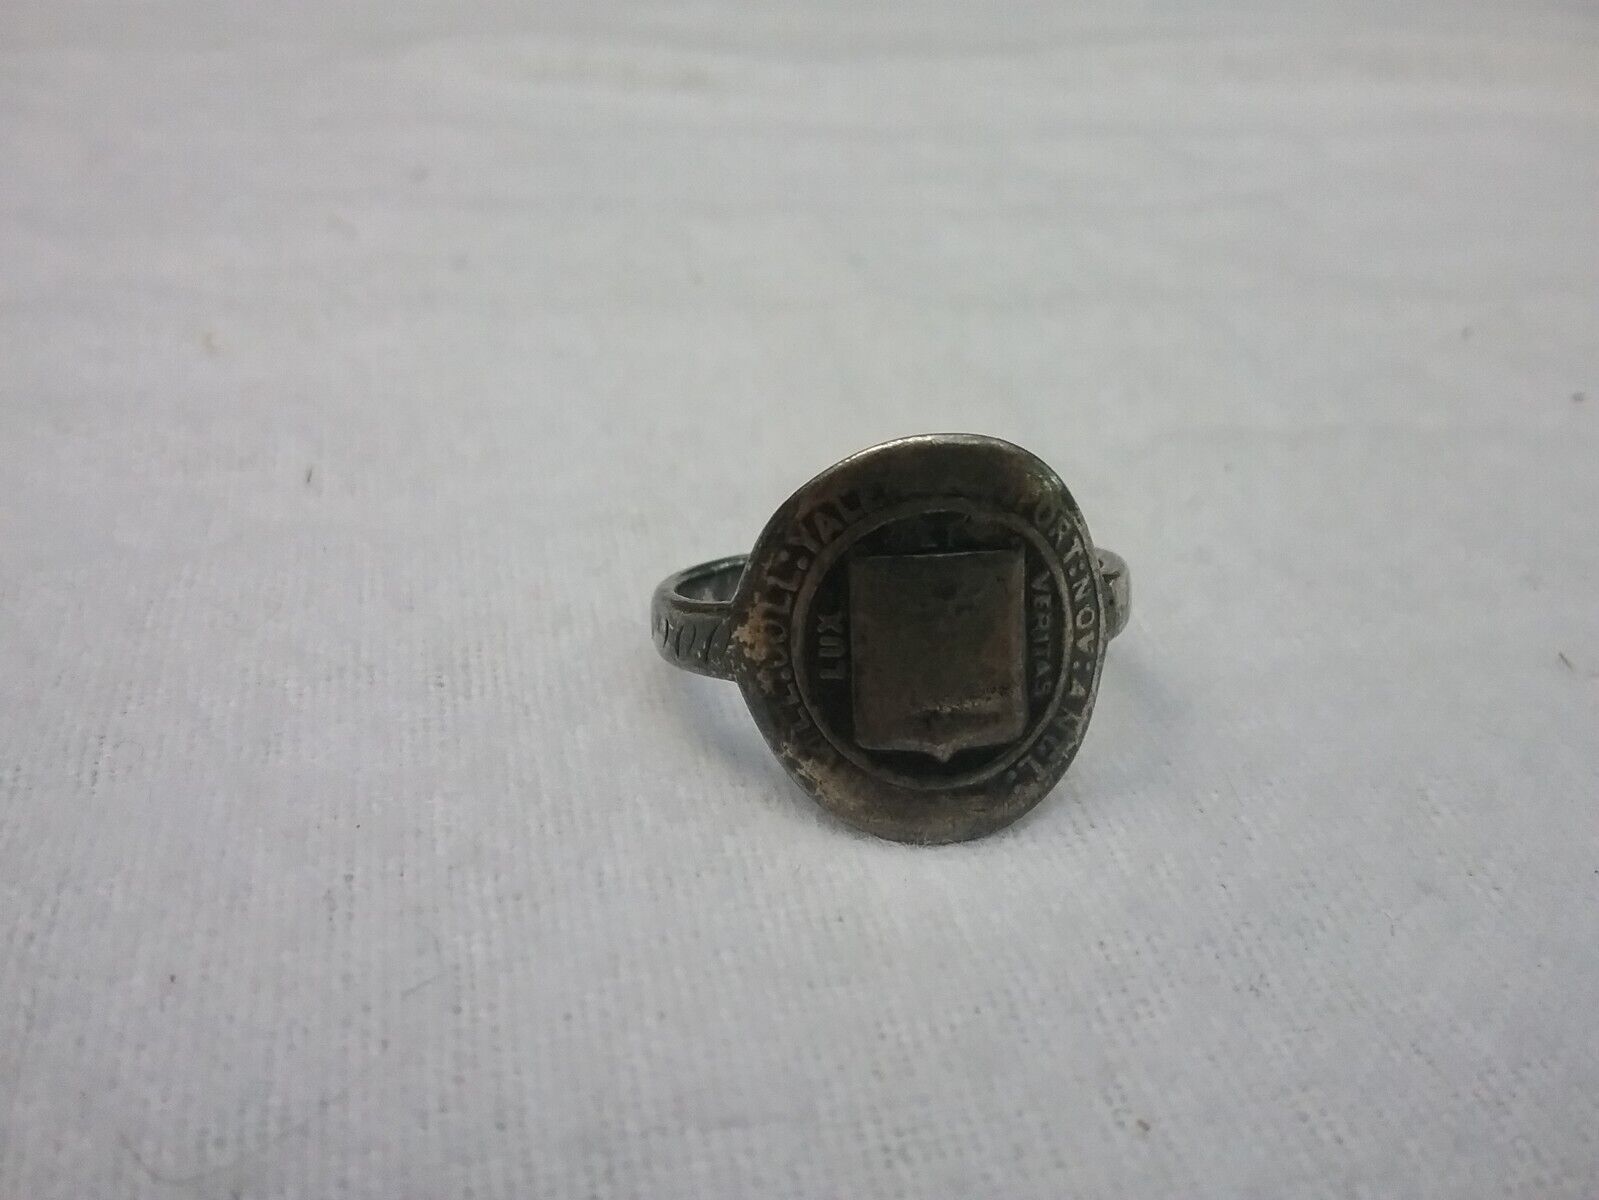 LOWER PRICE Vintage Antique 1900 Yale University Sterling Silver School Ring.